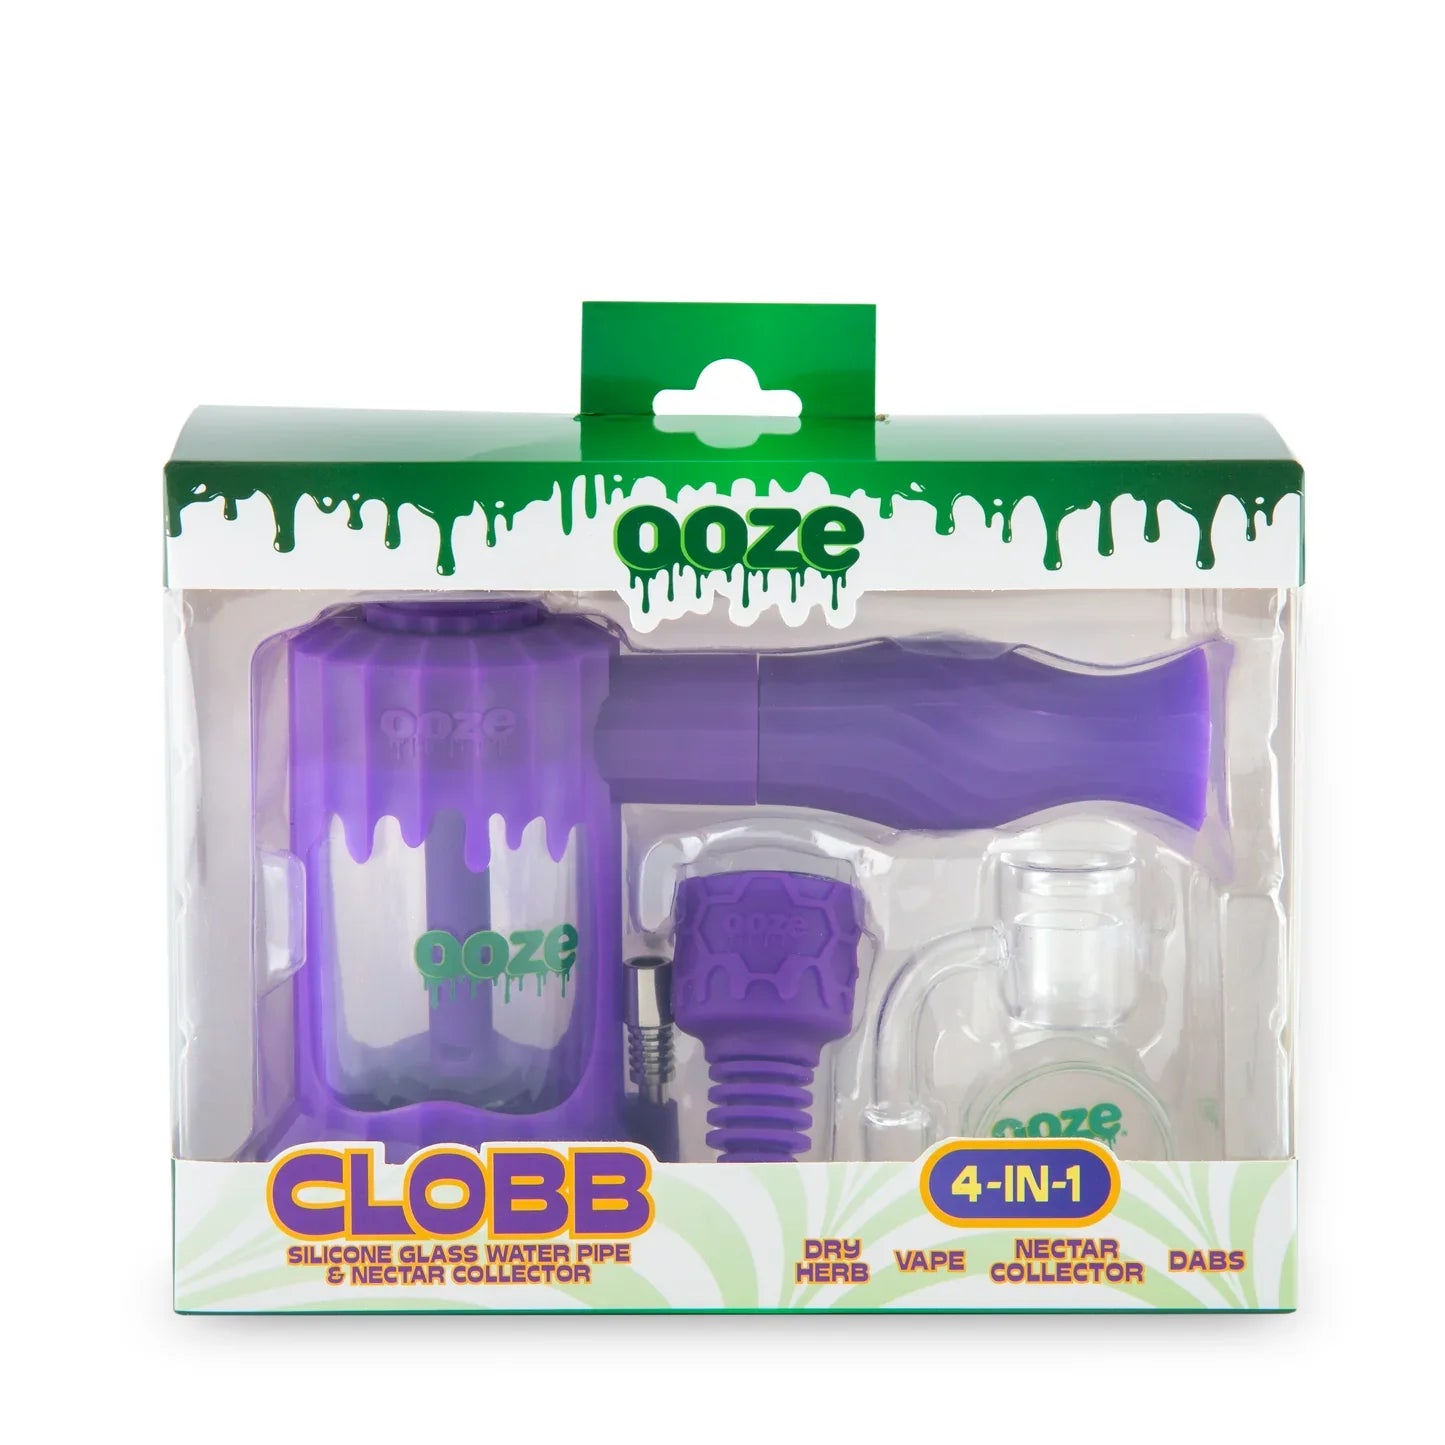 Ooze | Clobb – Silicone Glass 4-In-1 Hybrid_7